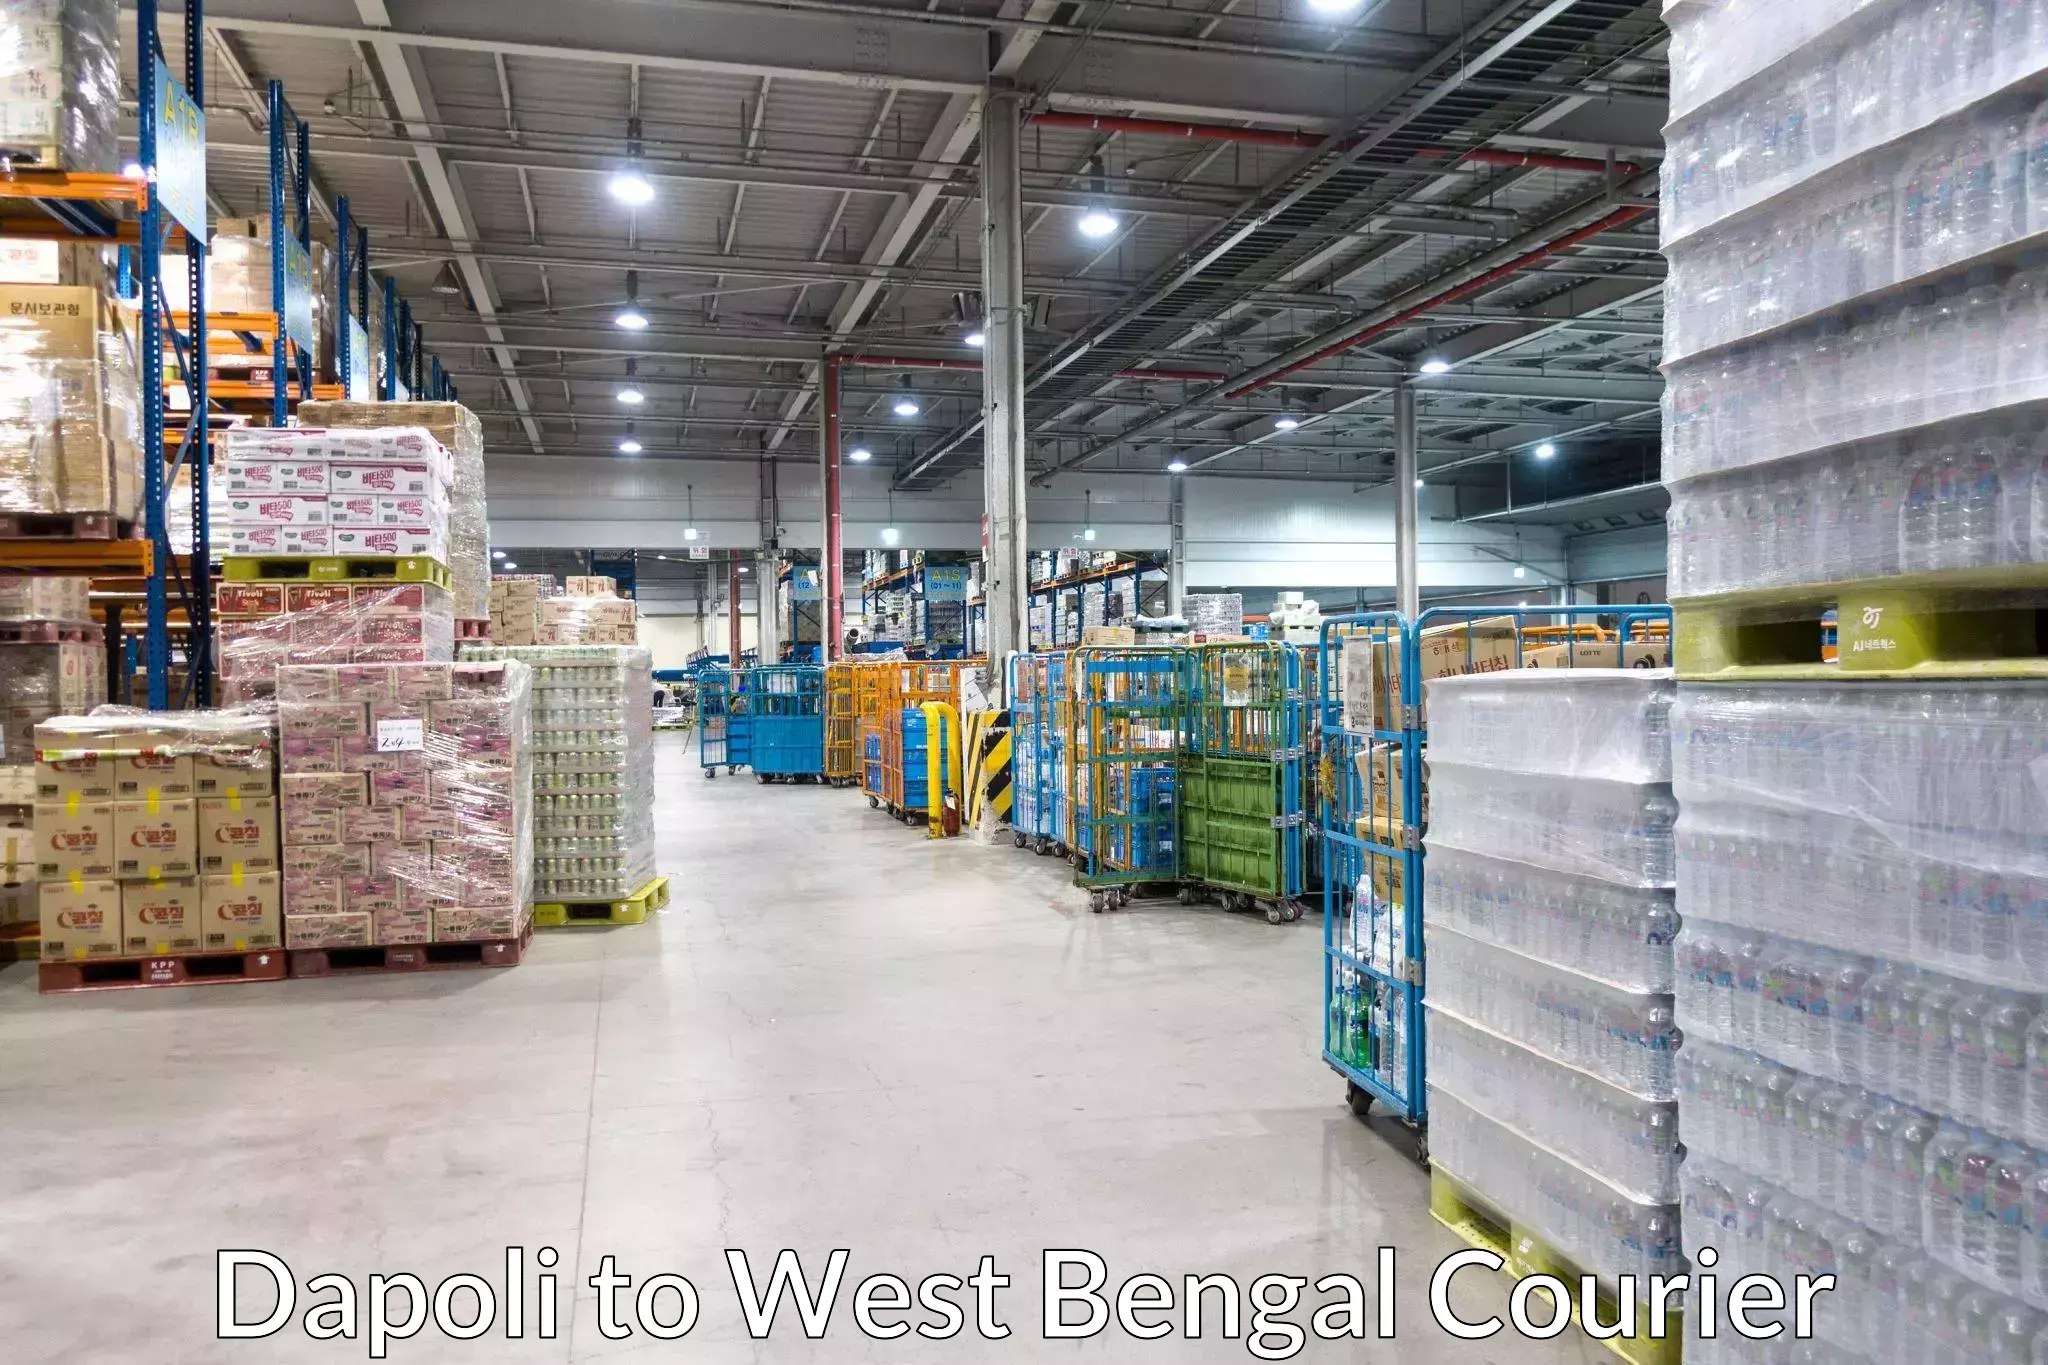 Express delivery capabilities Dapoli to West Bengal